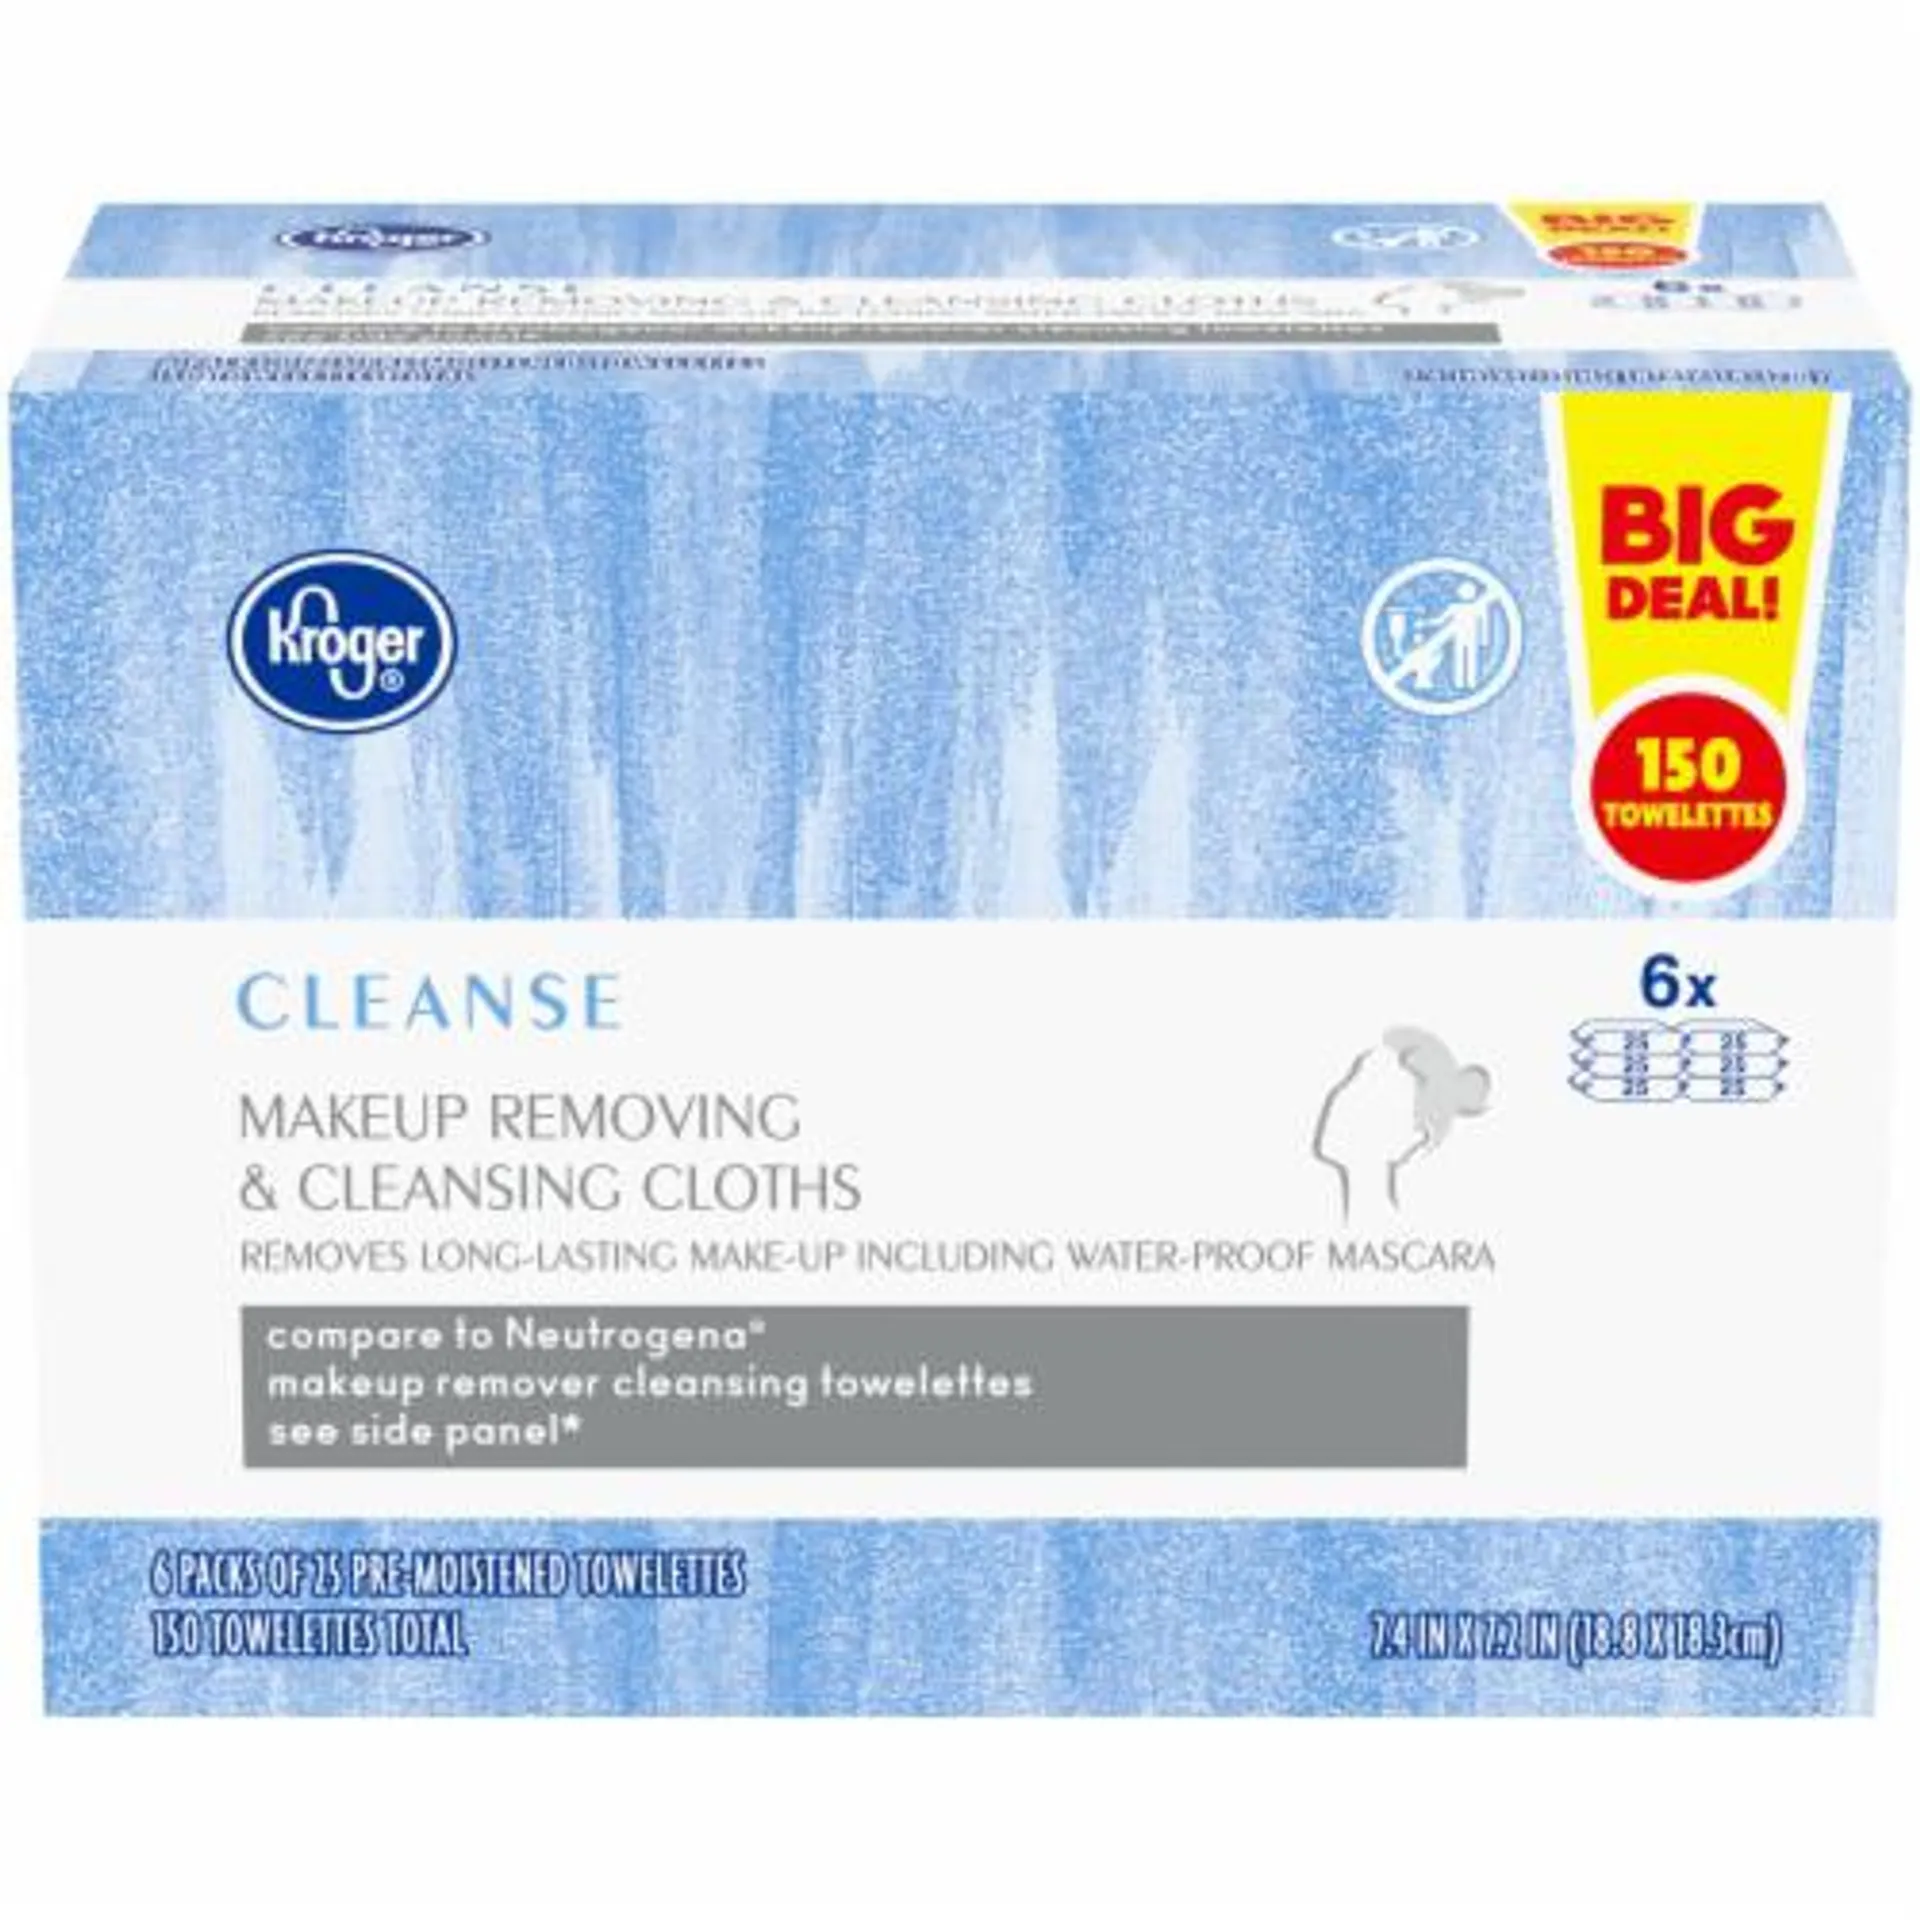 Kroger® Cleanse Makeup Removing & Cleansing Cloths